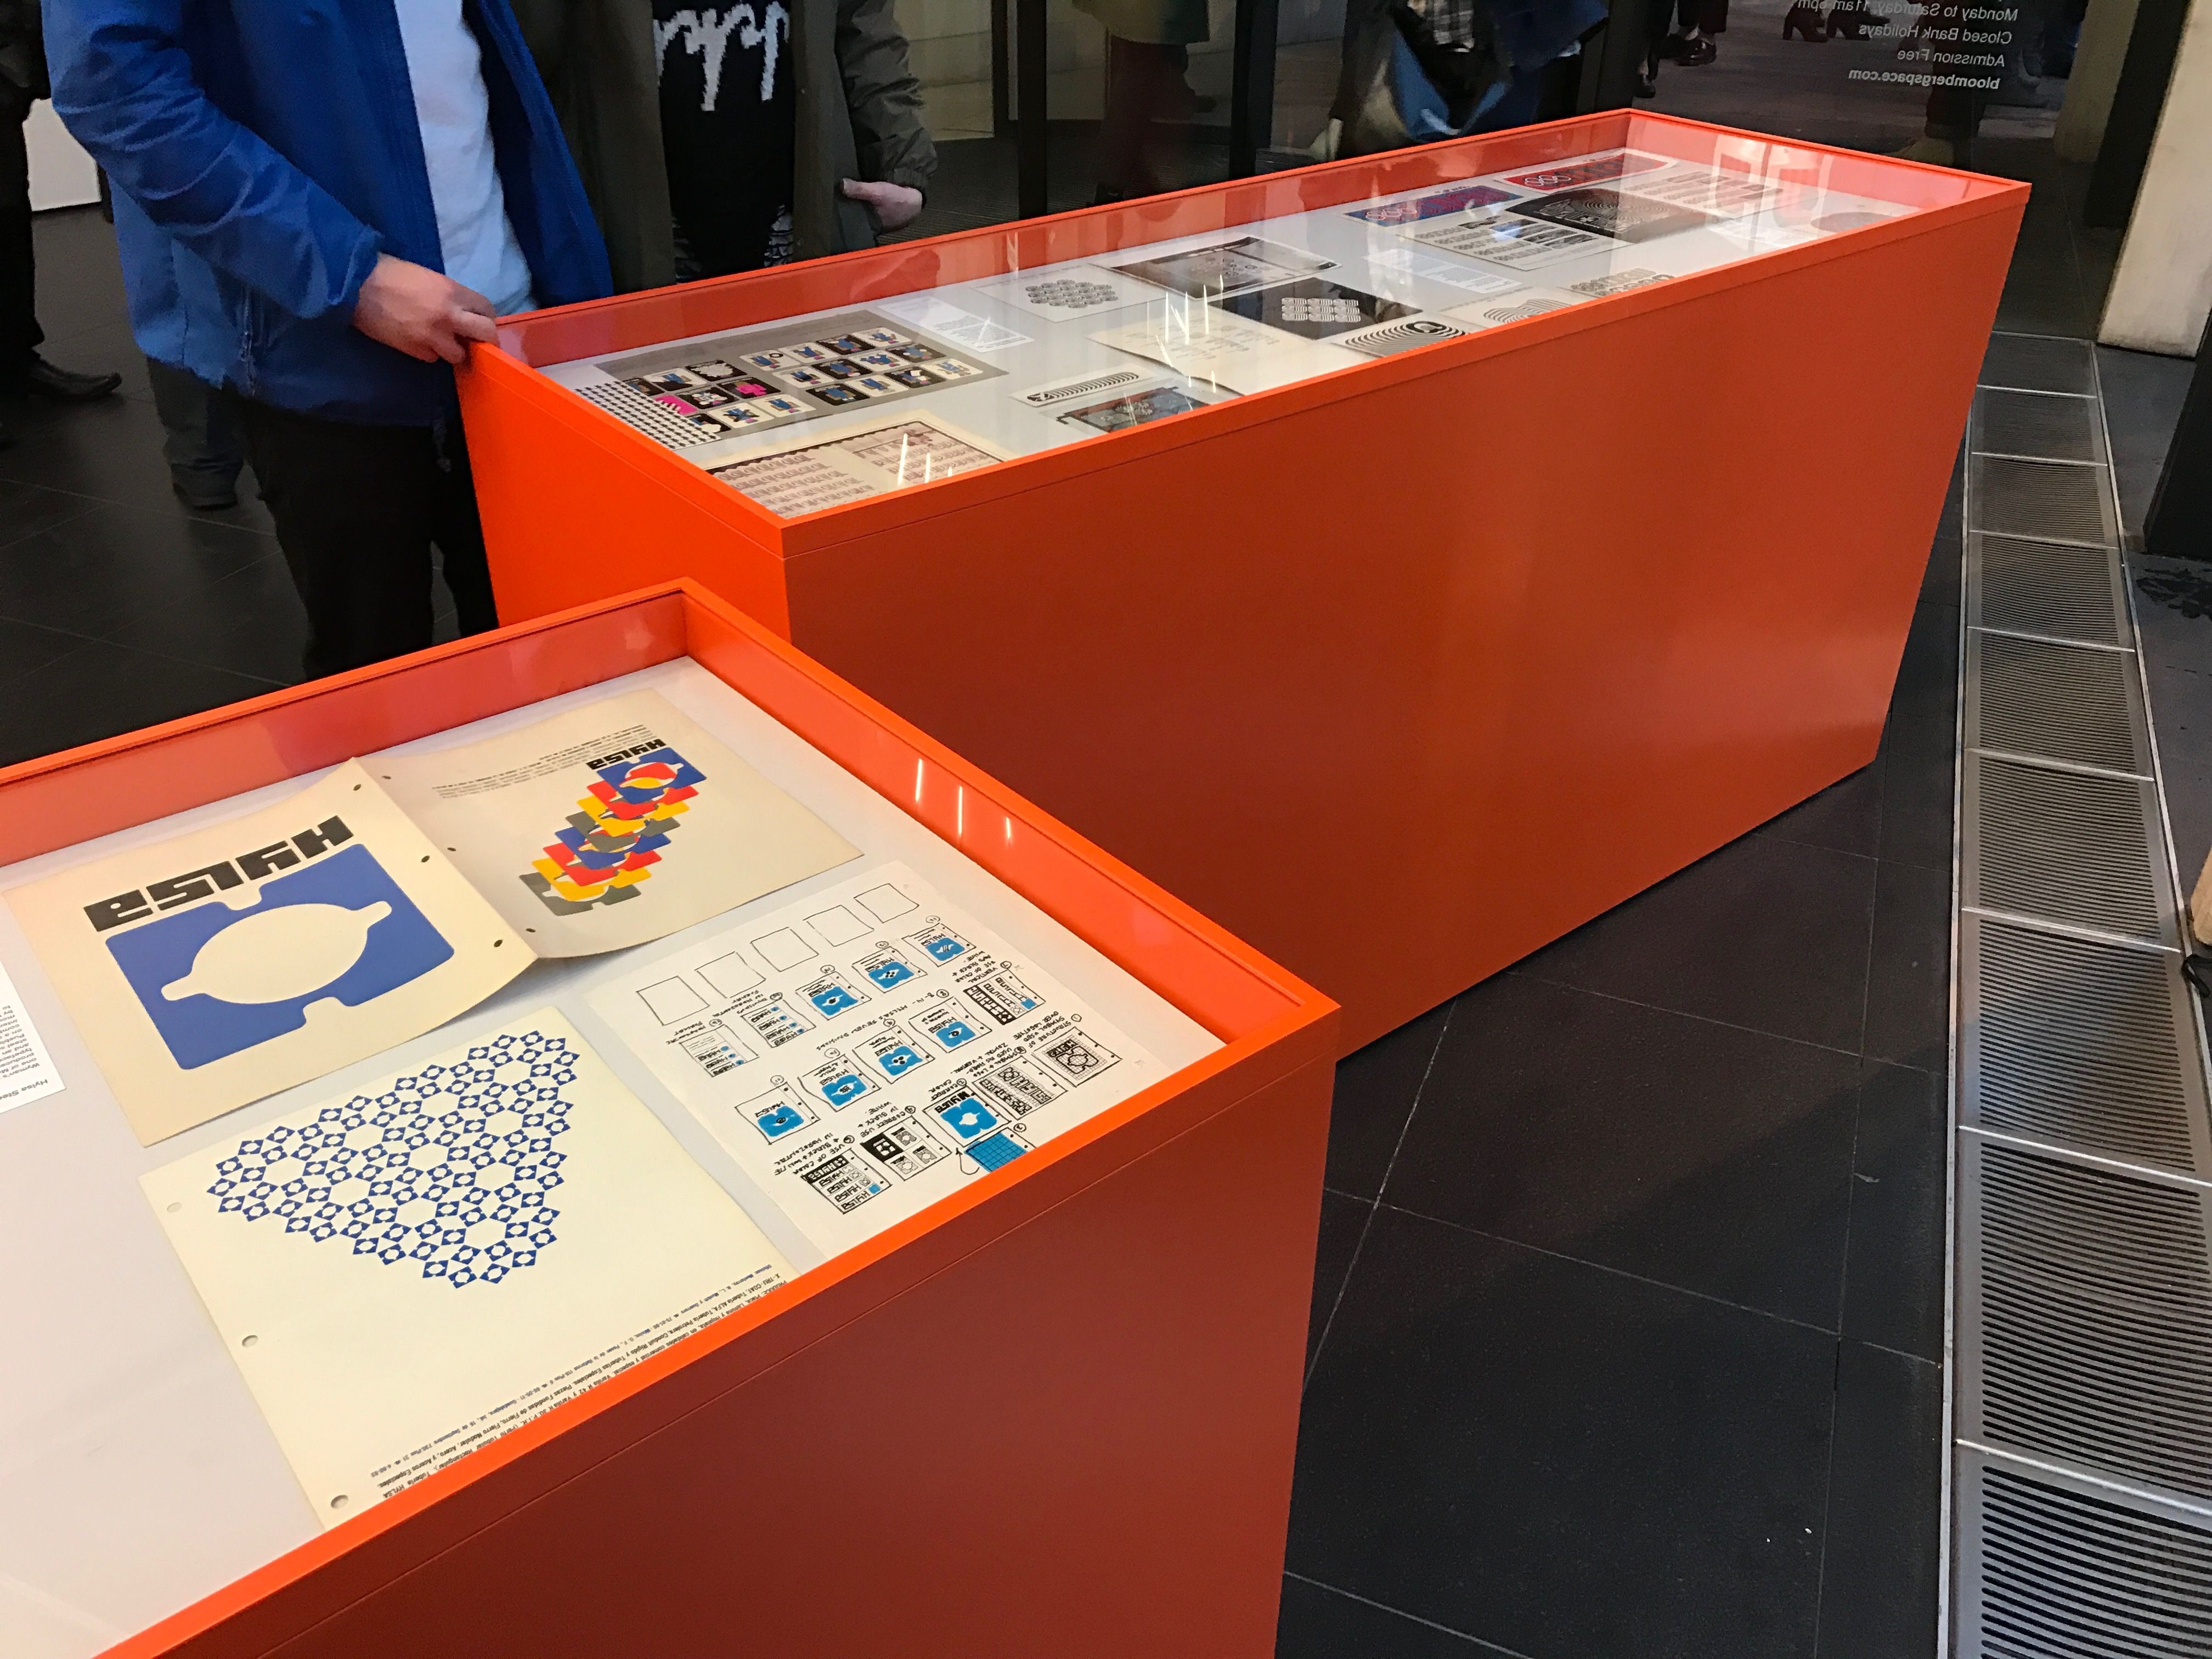 Lance Wyman: The surrounding bezels on these display units were welded from aluminium.